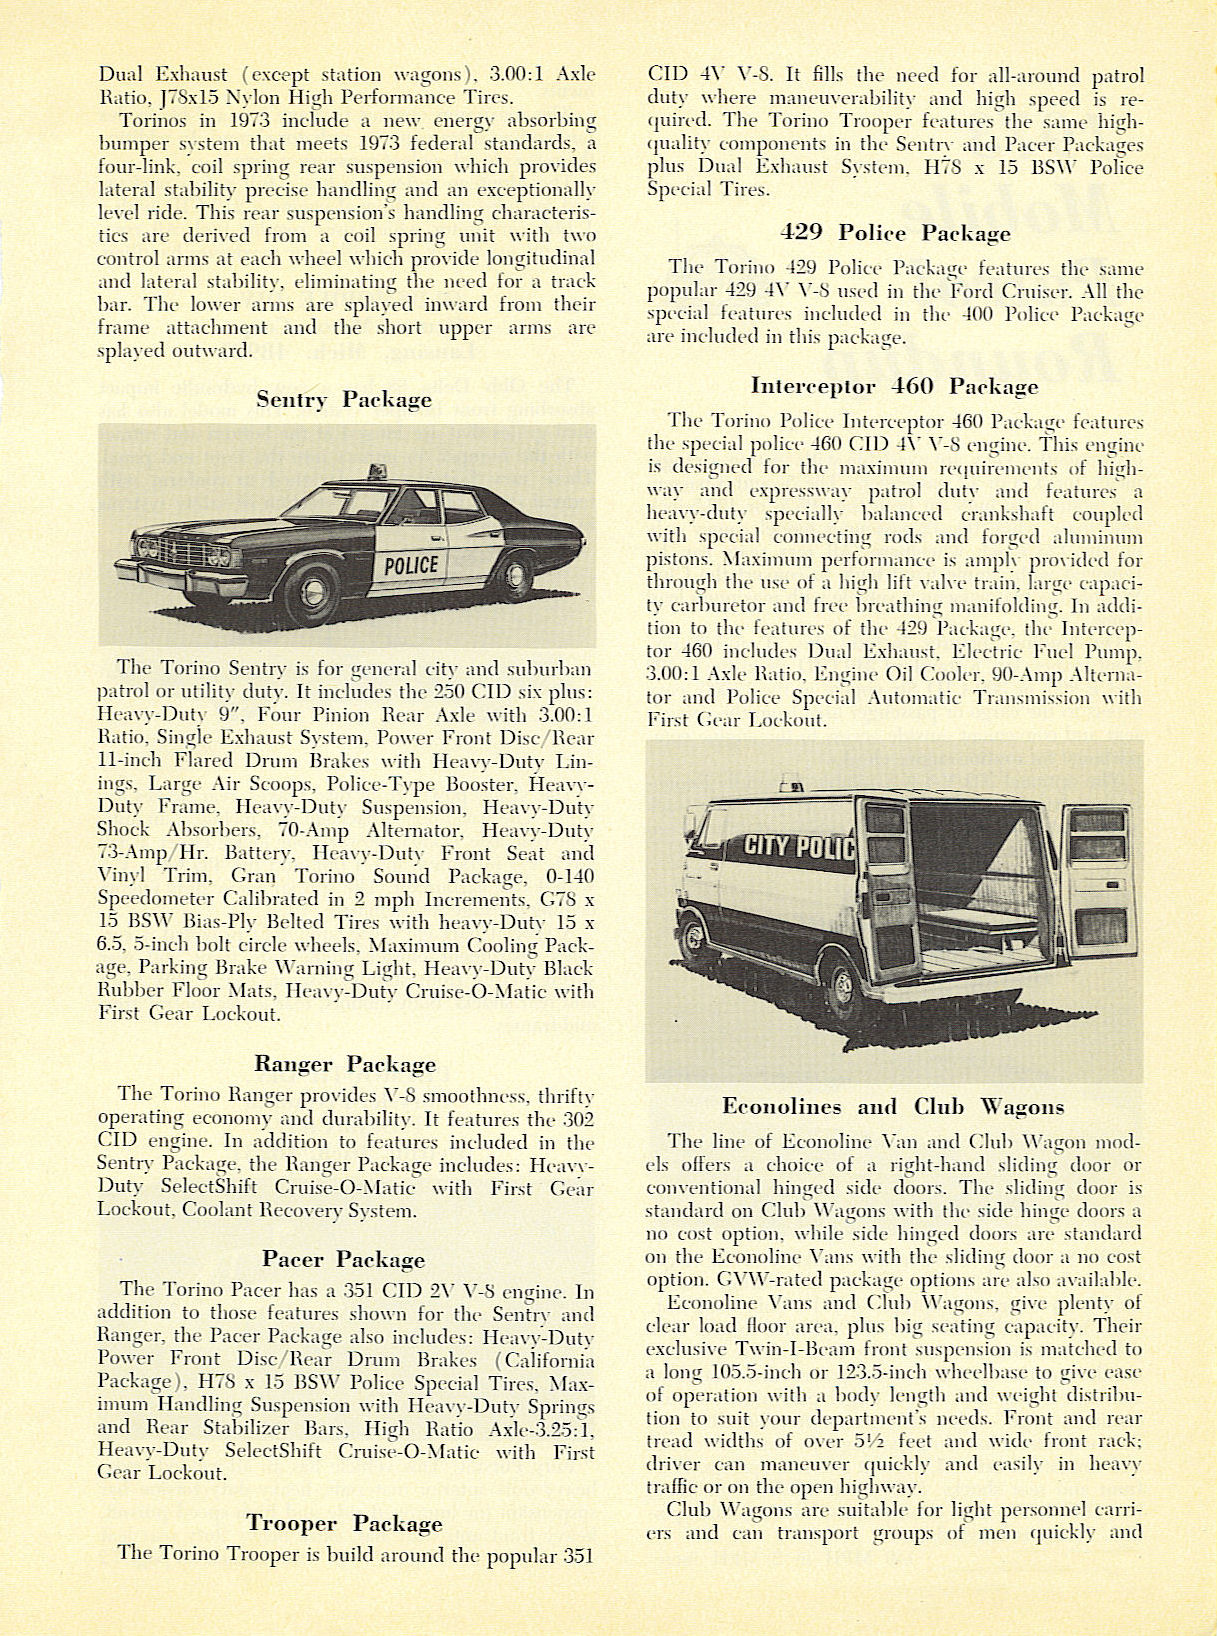 1973 Police Vehicles Booklet Page 6